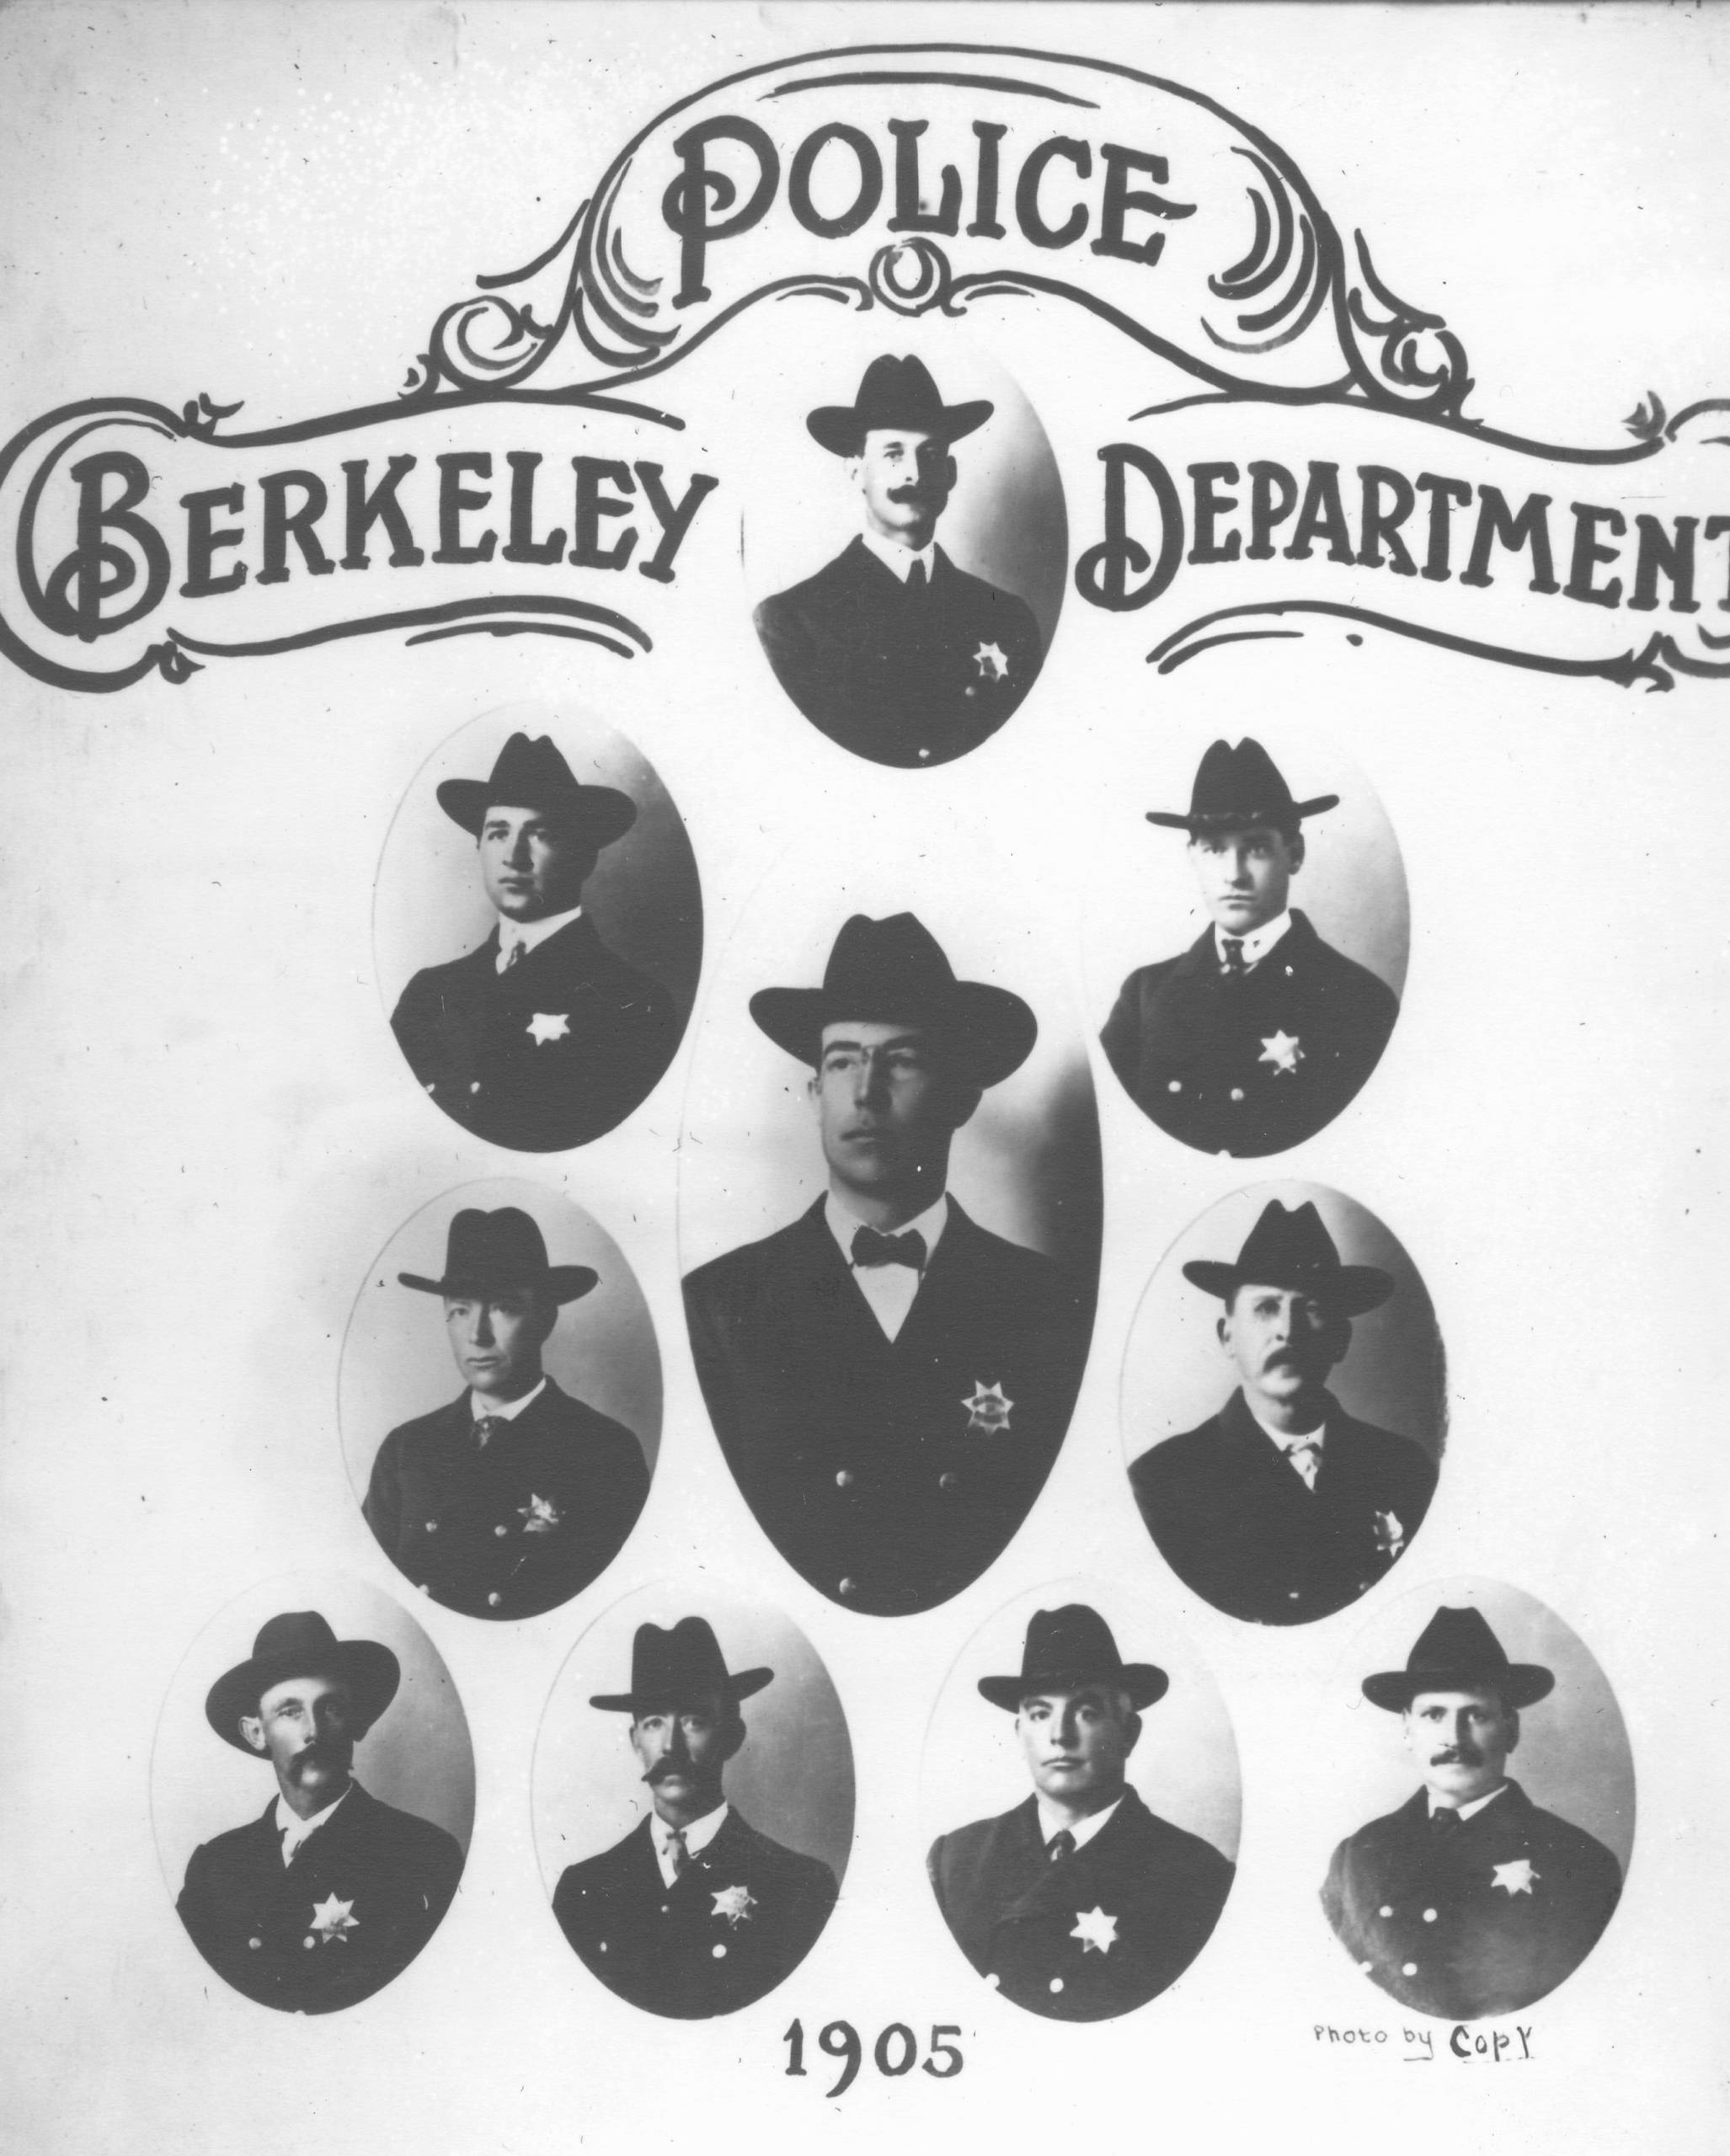 Photos of the 10 men who made up the Berkeley Police Department in 1905 when August Vollmer was elected town marshal.